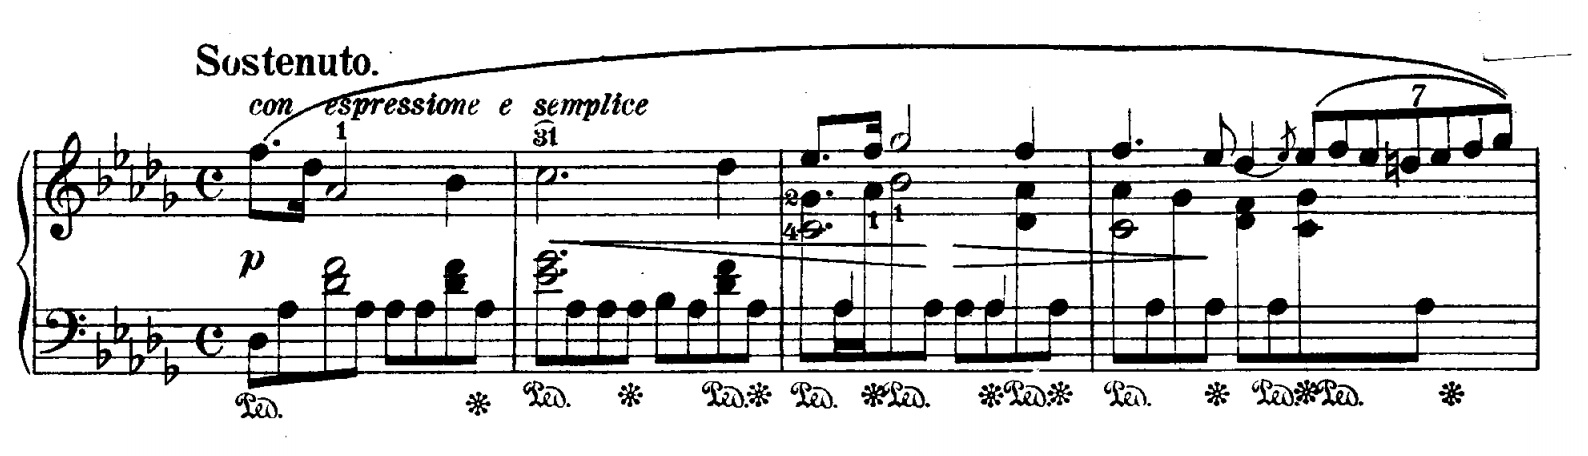 Sheet music for bars 1–4 of Chopin's Prelude in D-flat Major, the "Raindrop Prelude"